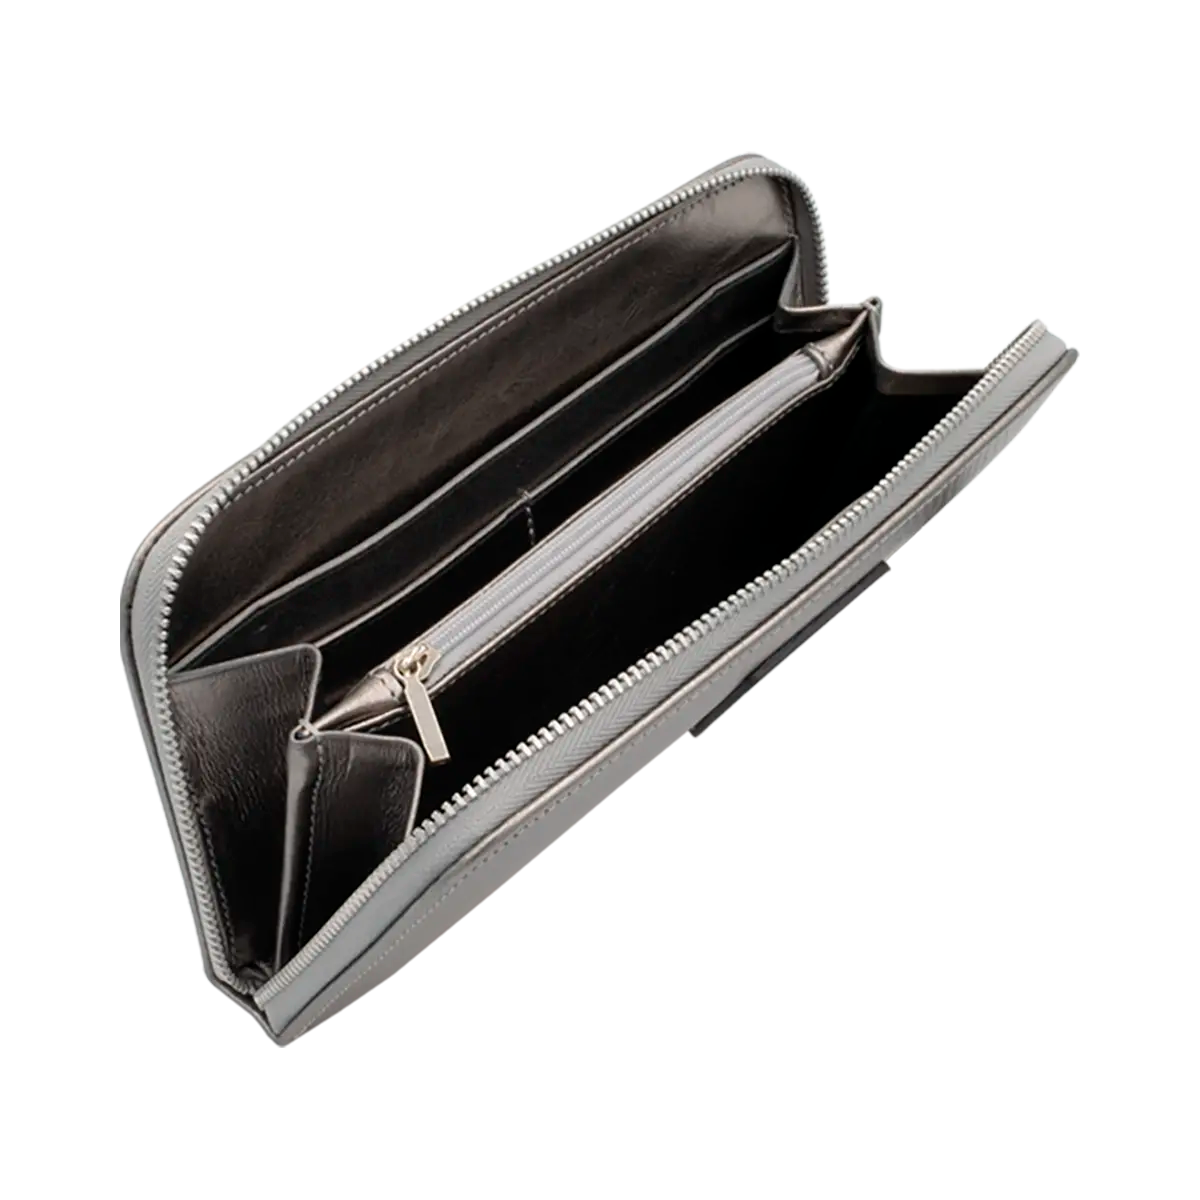 largesilver leather wallet with hand strap. Fashion Accessories for women shop in San Diego, CA.